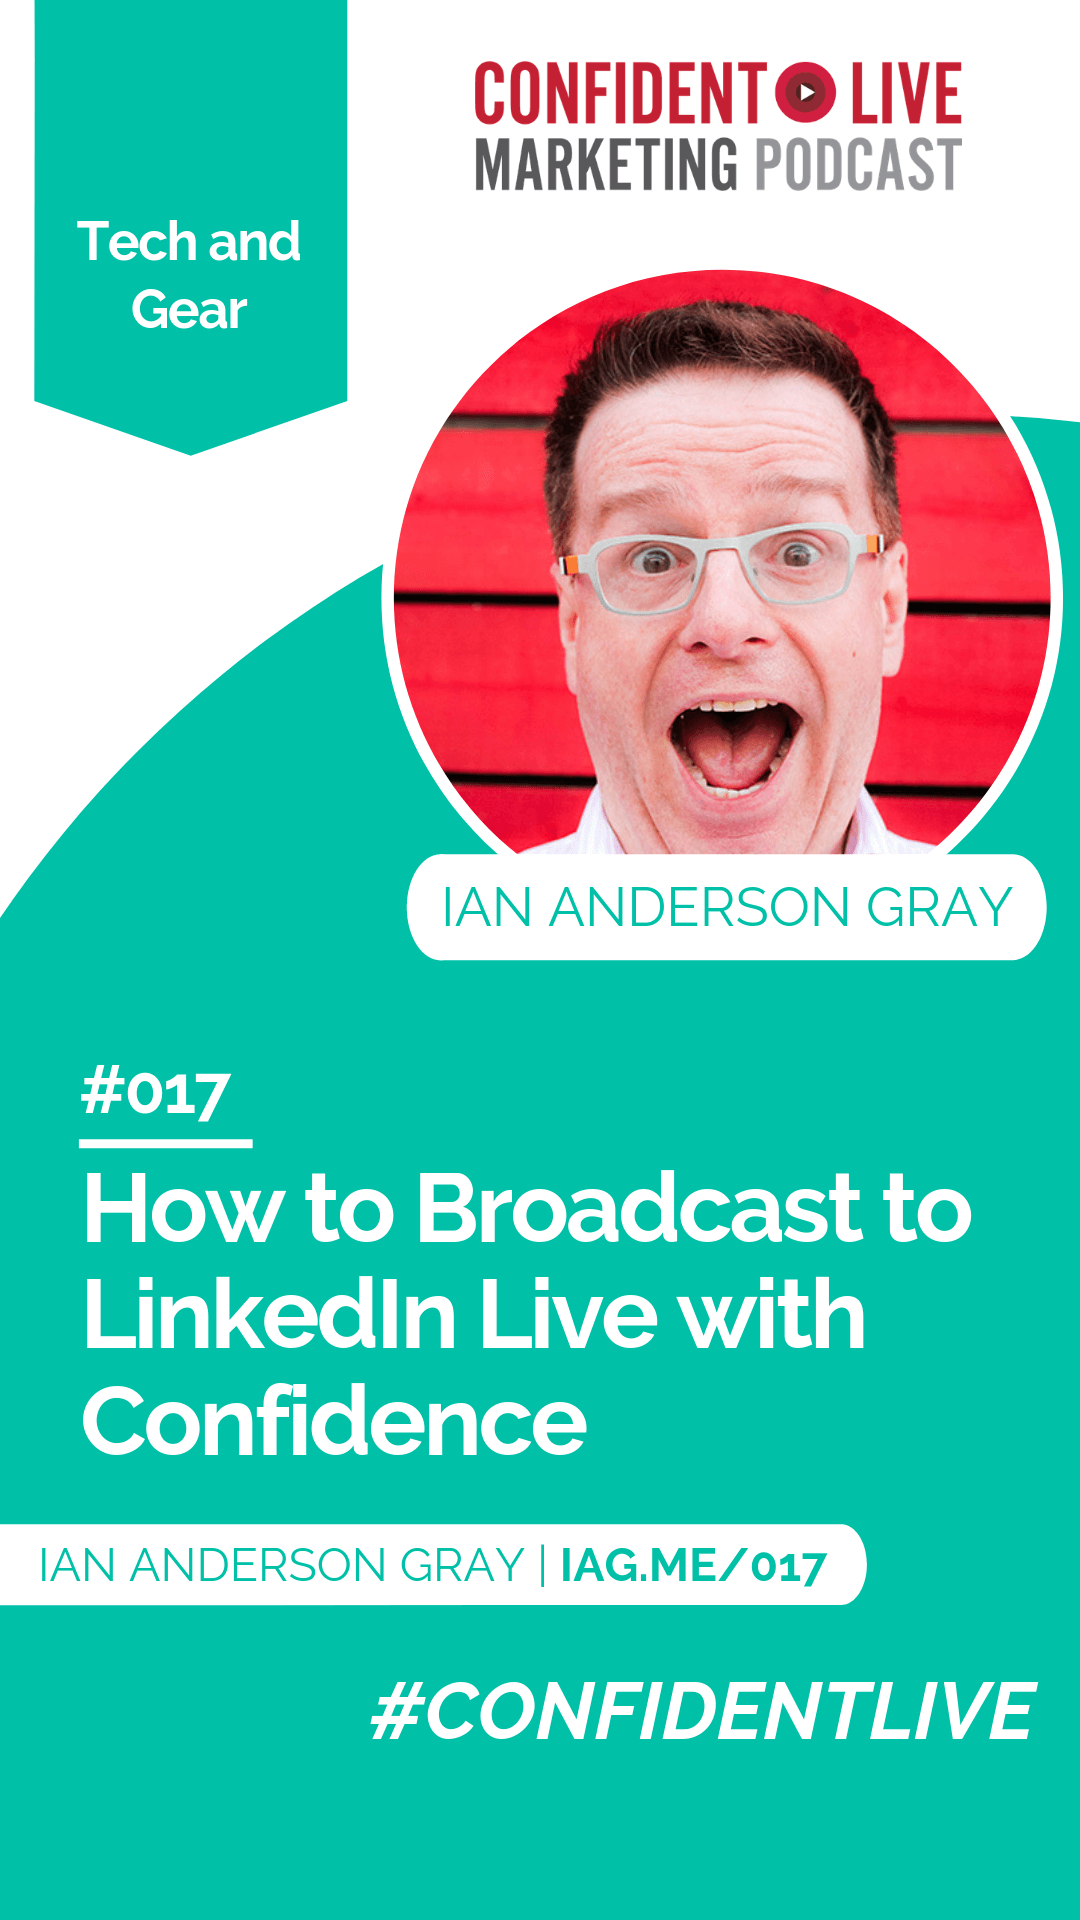 How to Broadcast to LinkedIn Live with Confidence